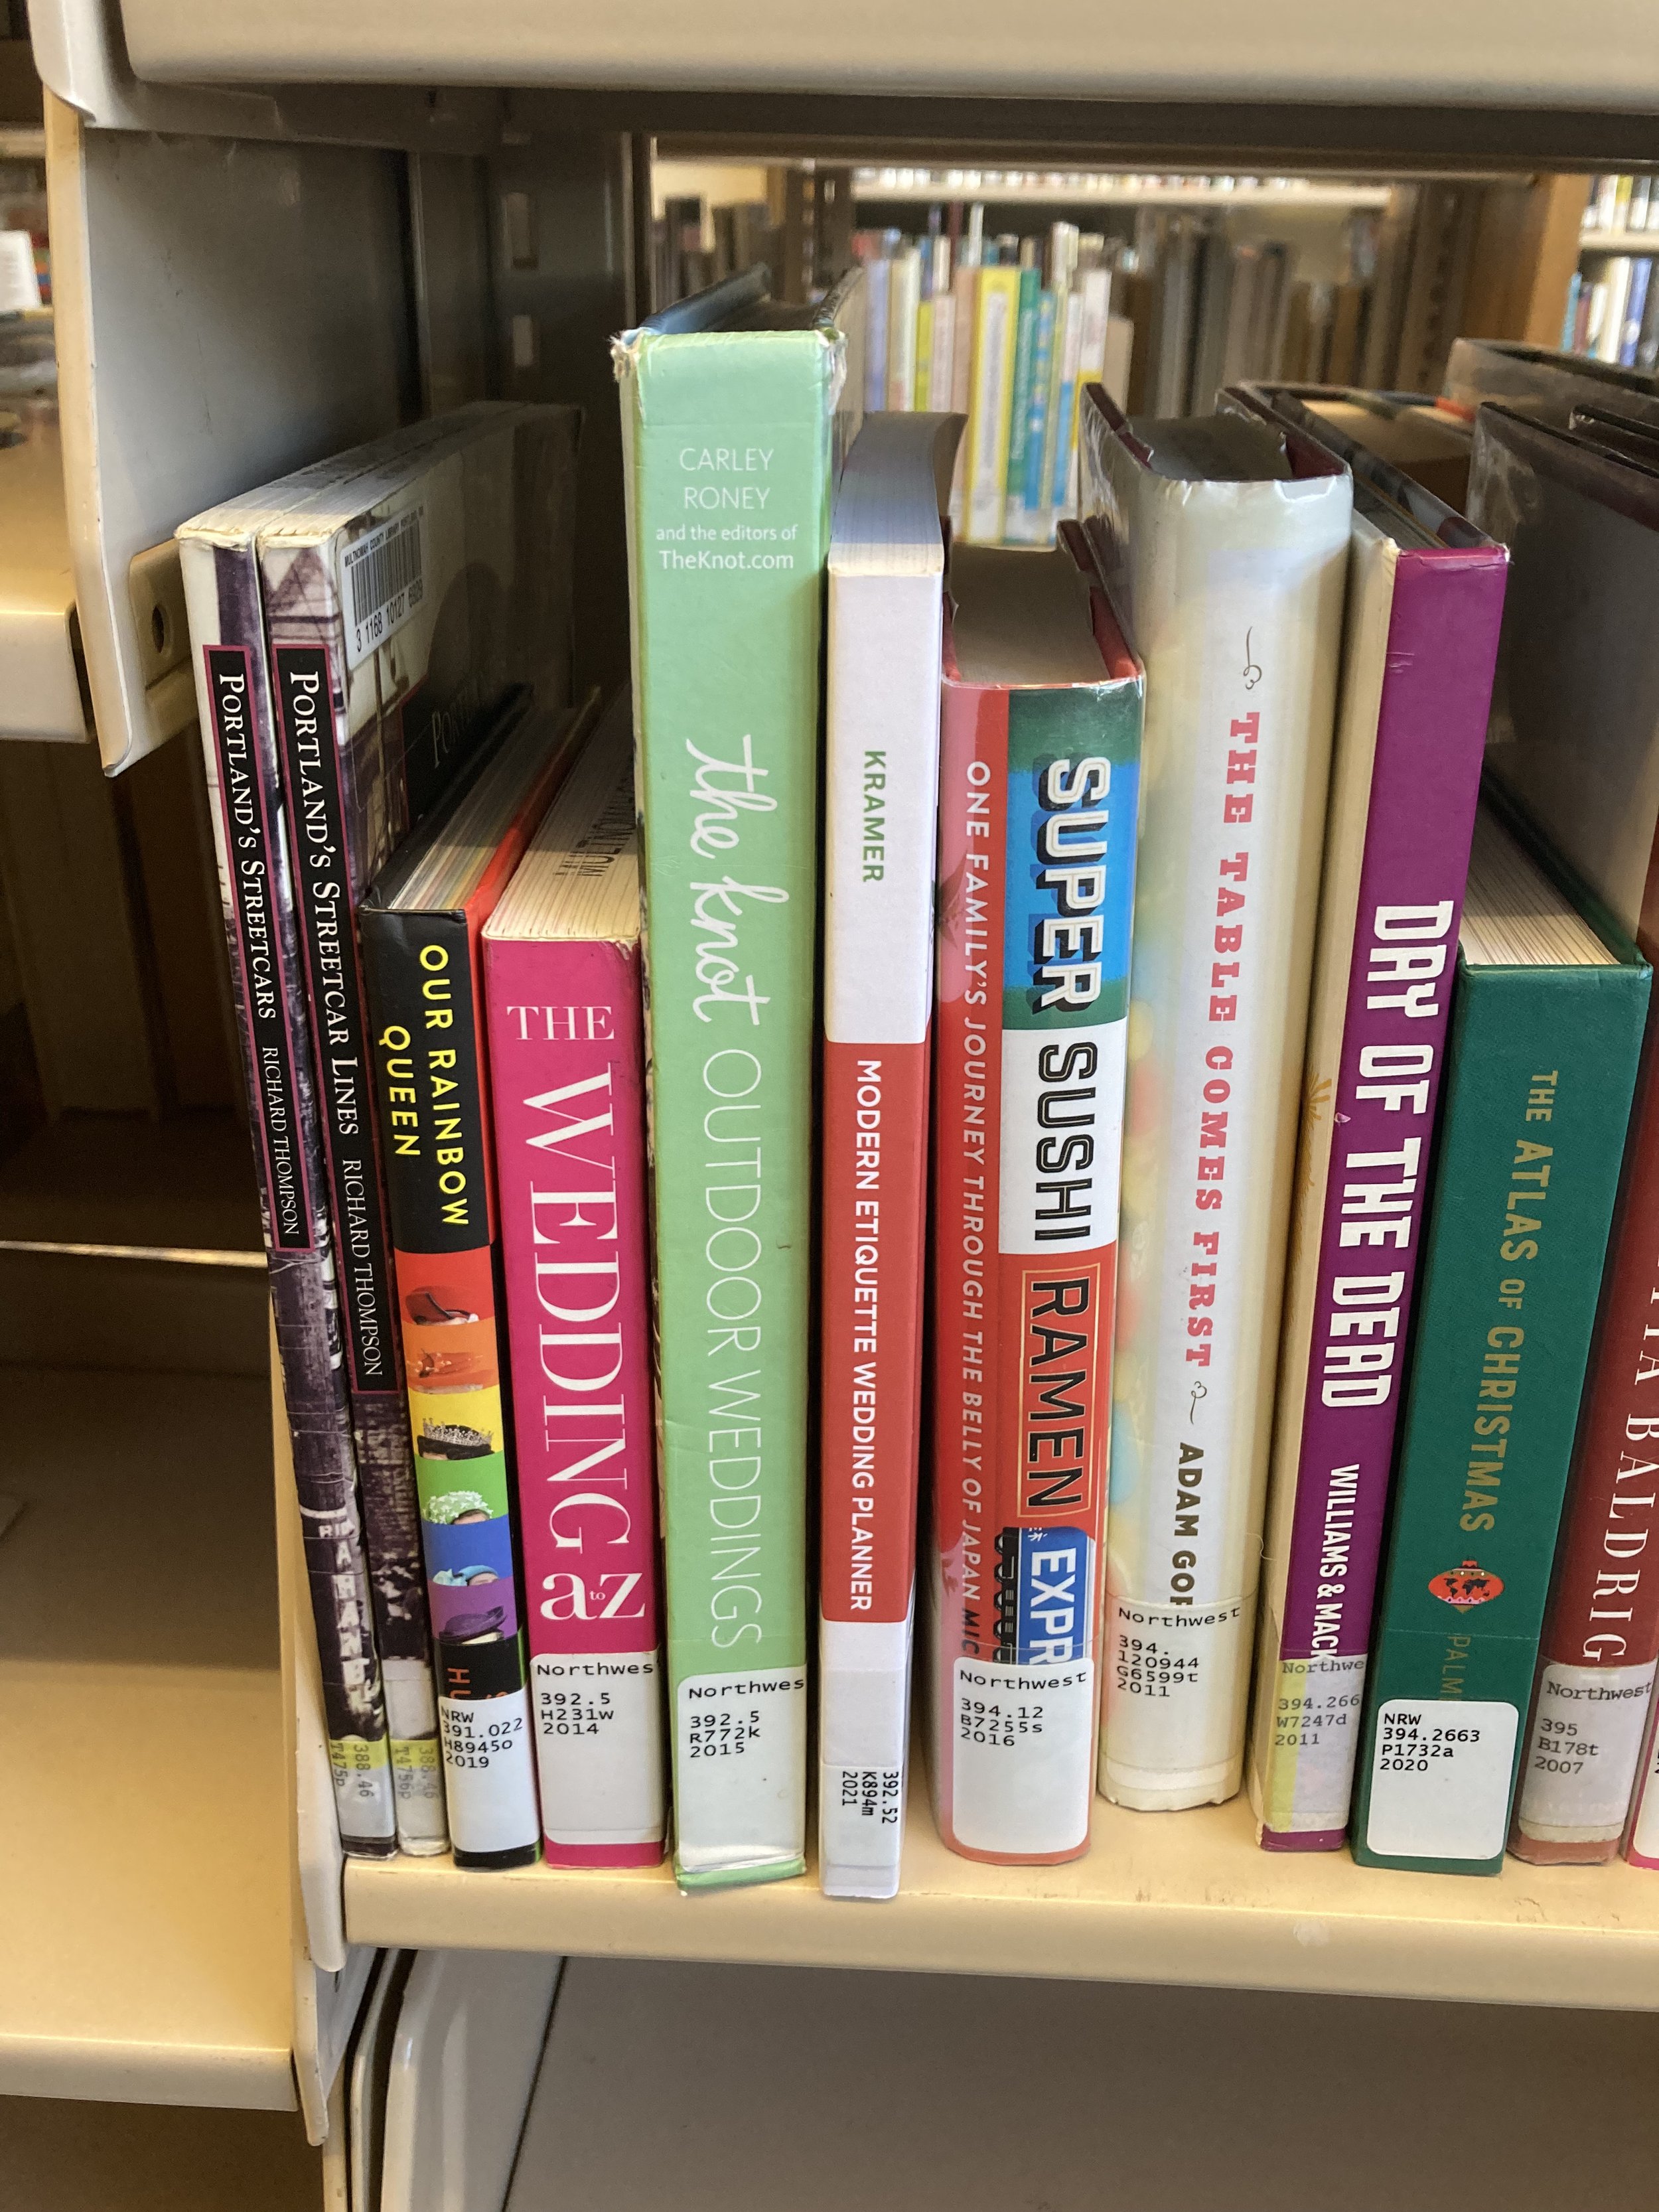 This is a photo of the book "Modern Etiquette Wedding Planner" on a shelf at the library.